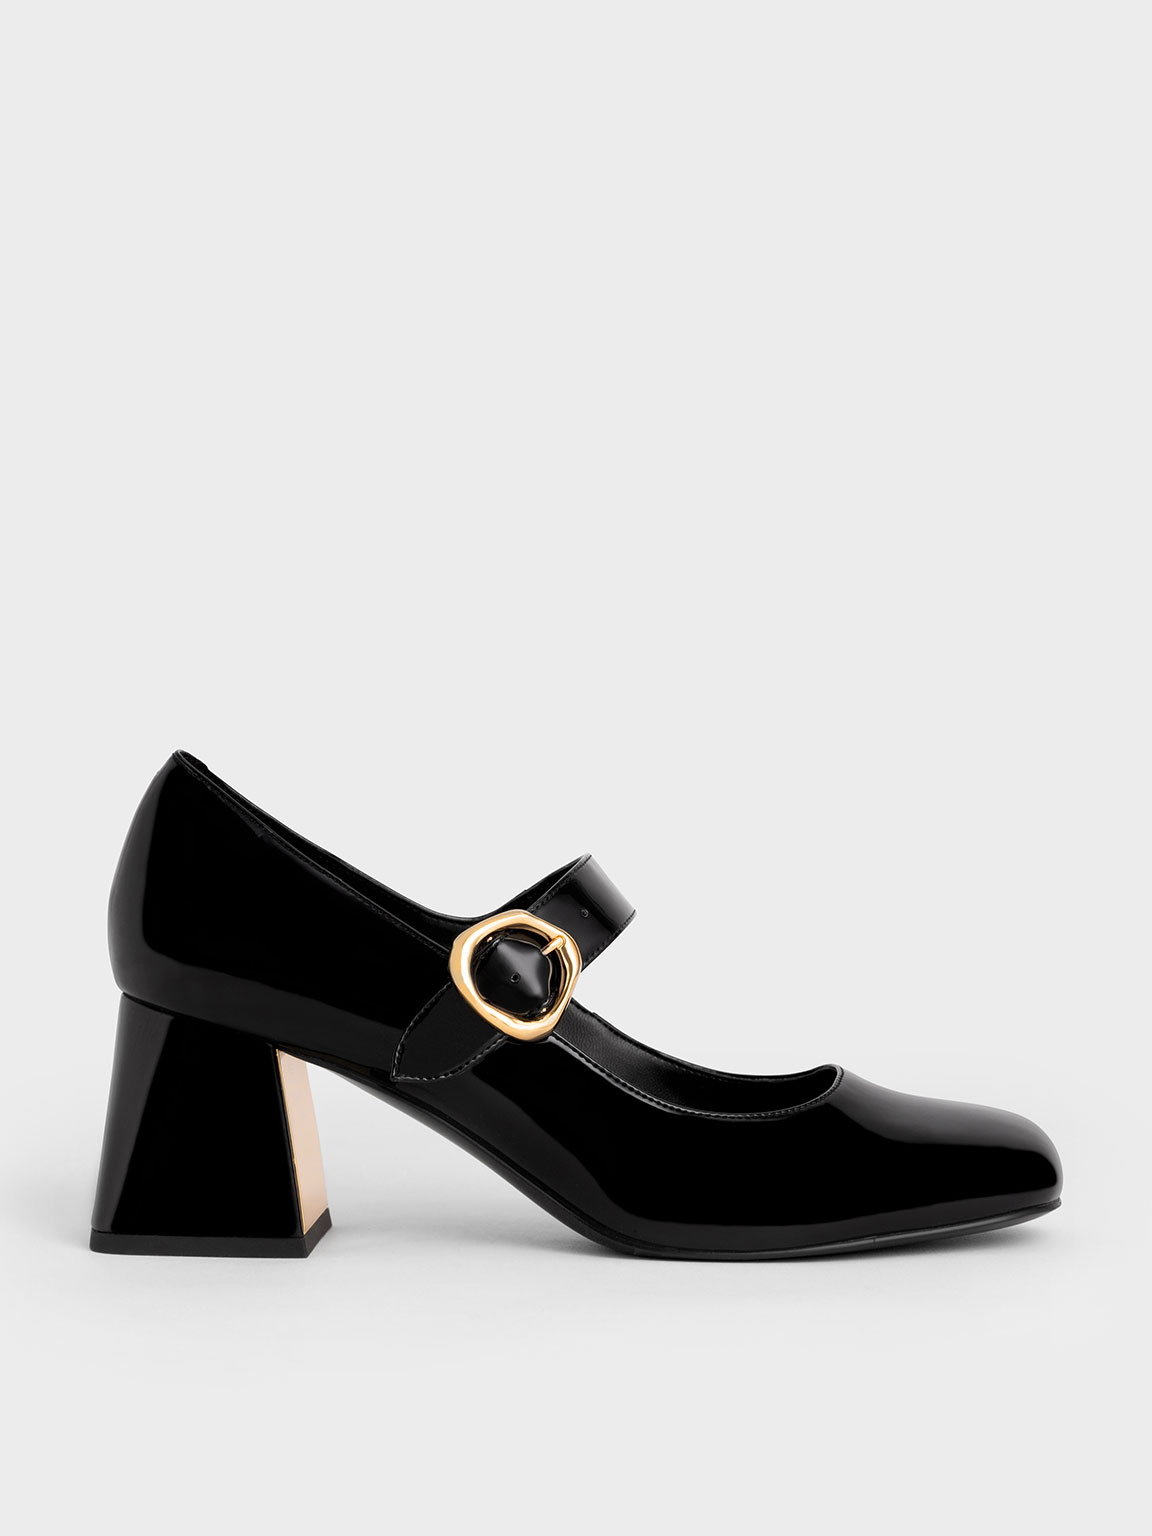 Patent Buckled Mary Jane Pumps